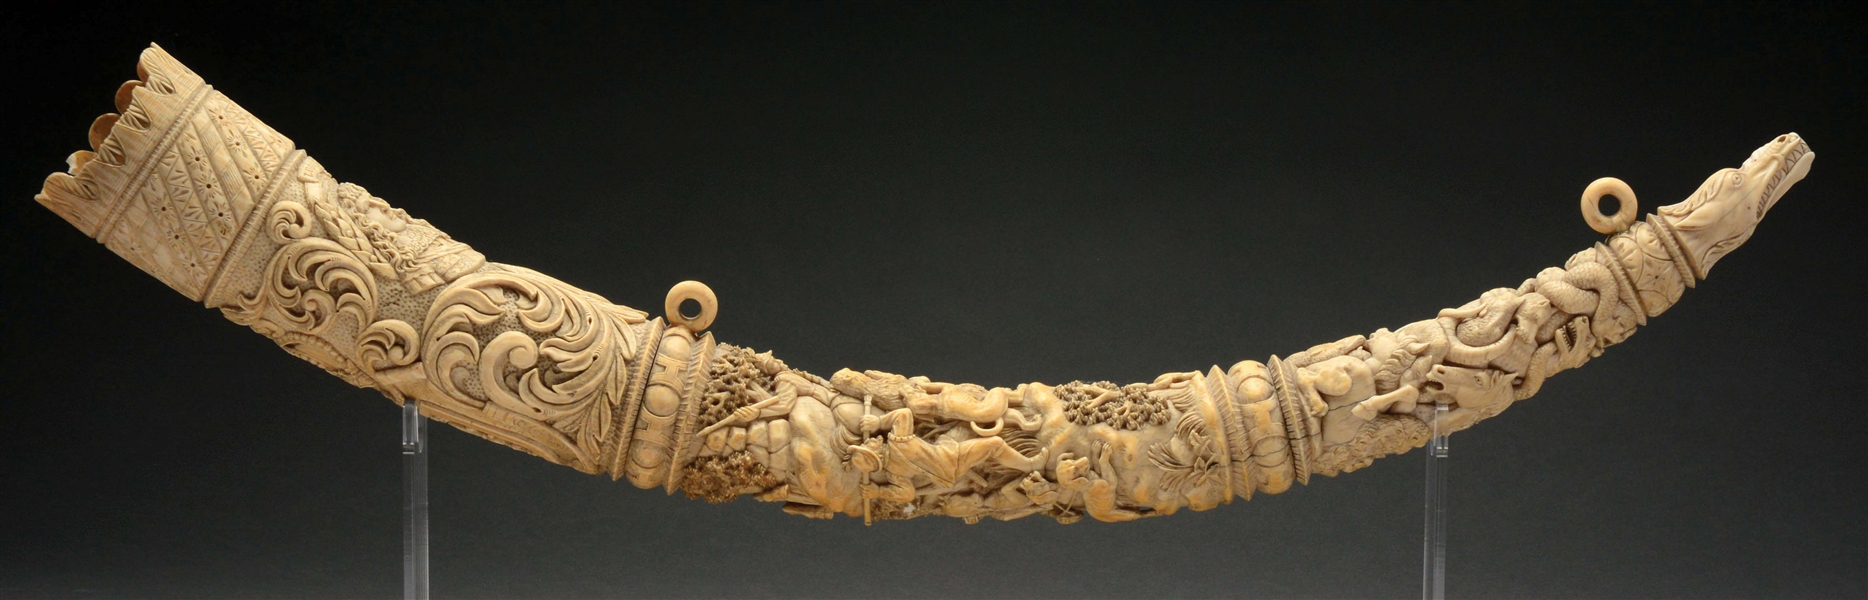 RARE DEEPLY CARVED EUROPEAN IVORY HORN WITH HUNTING ANIMALS.